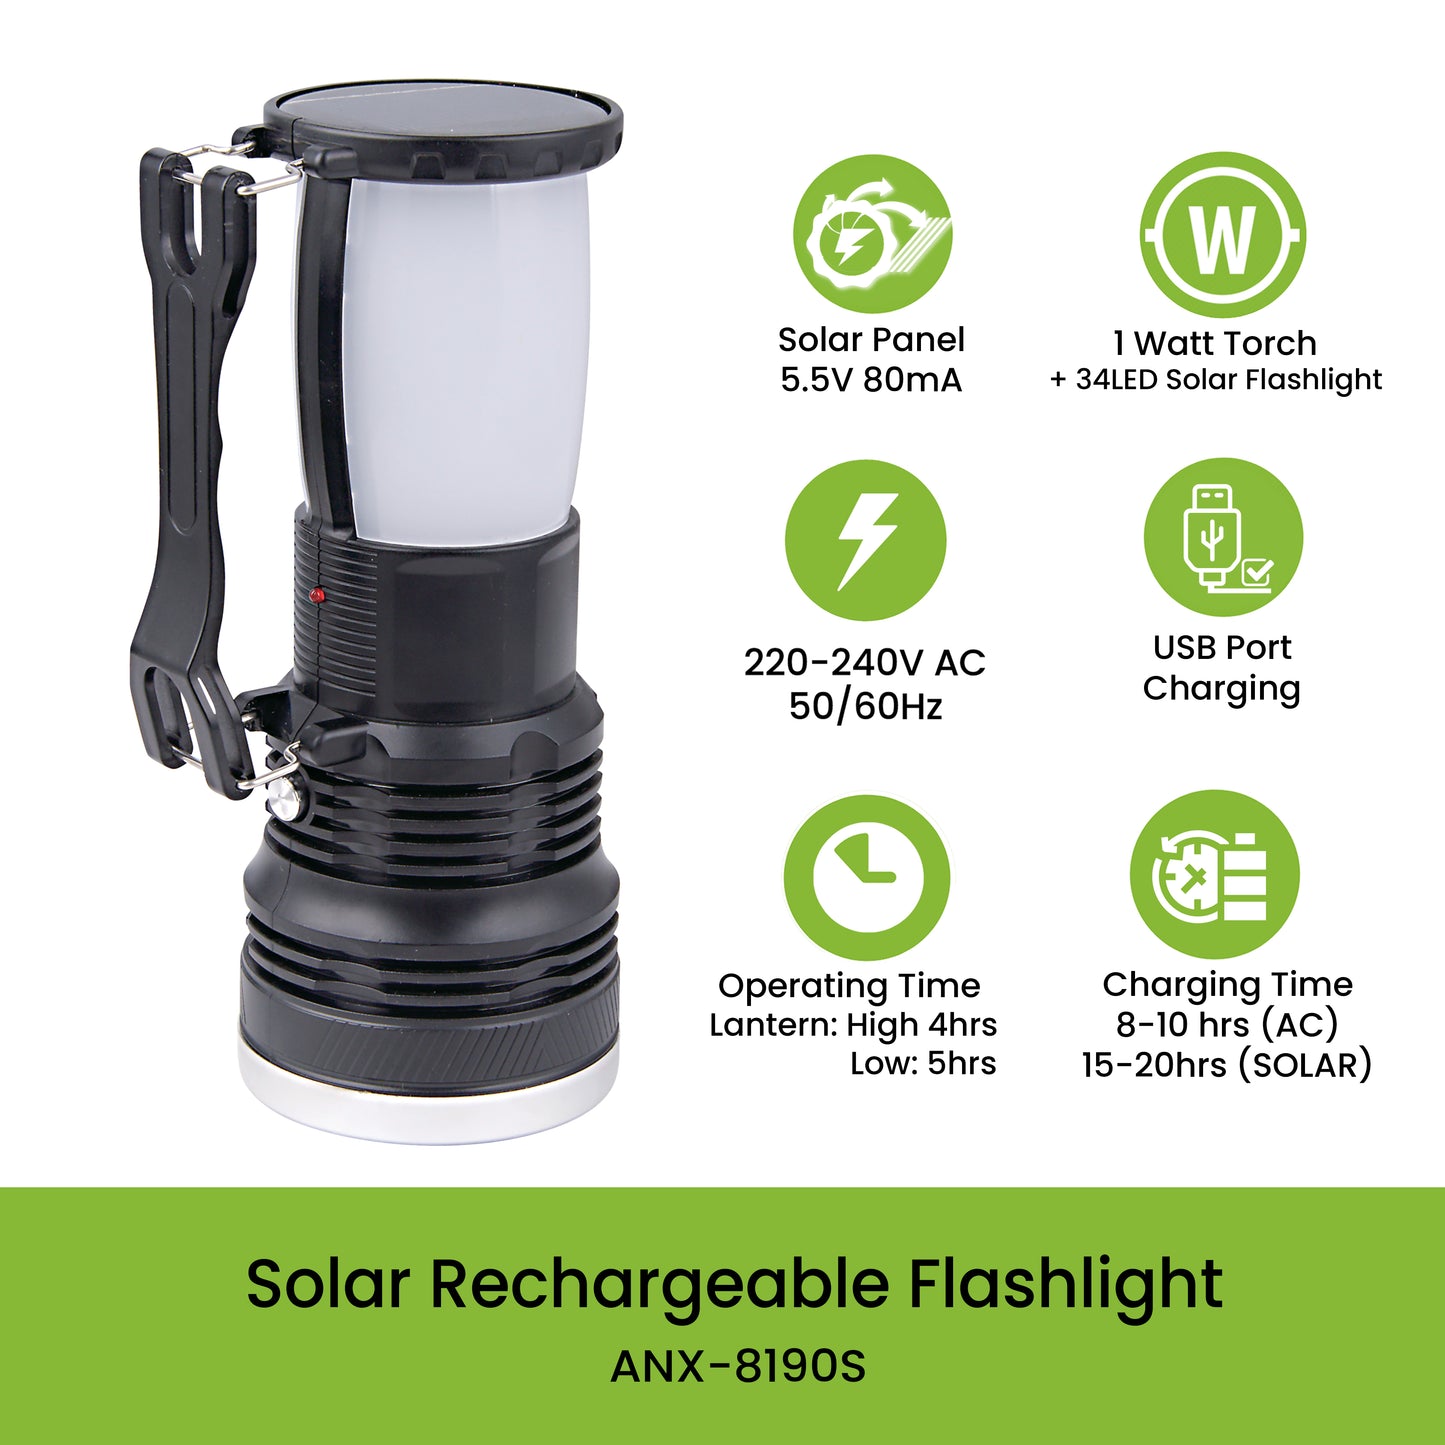 Nxled Solar Rechargeable Flashlight (ANX-8109S)